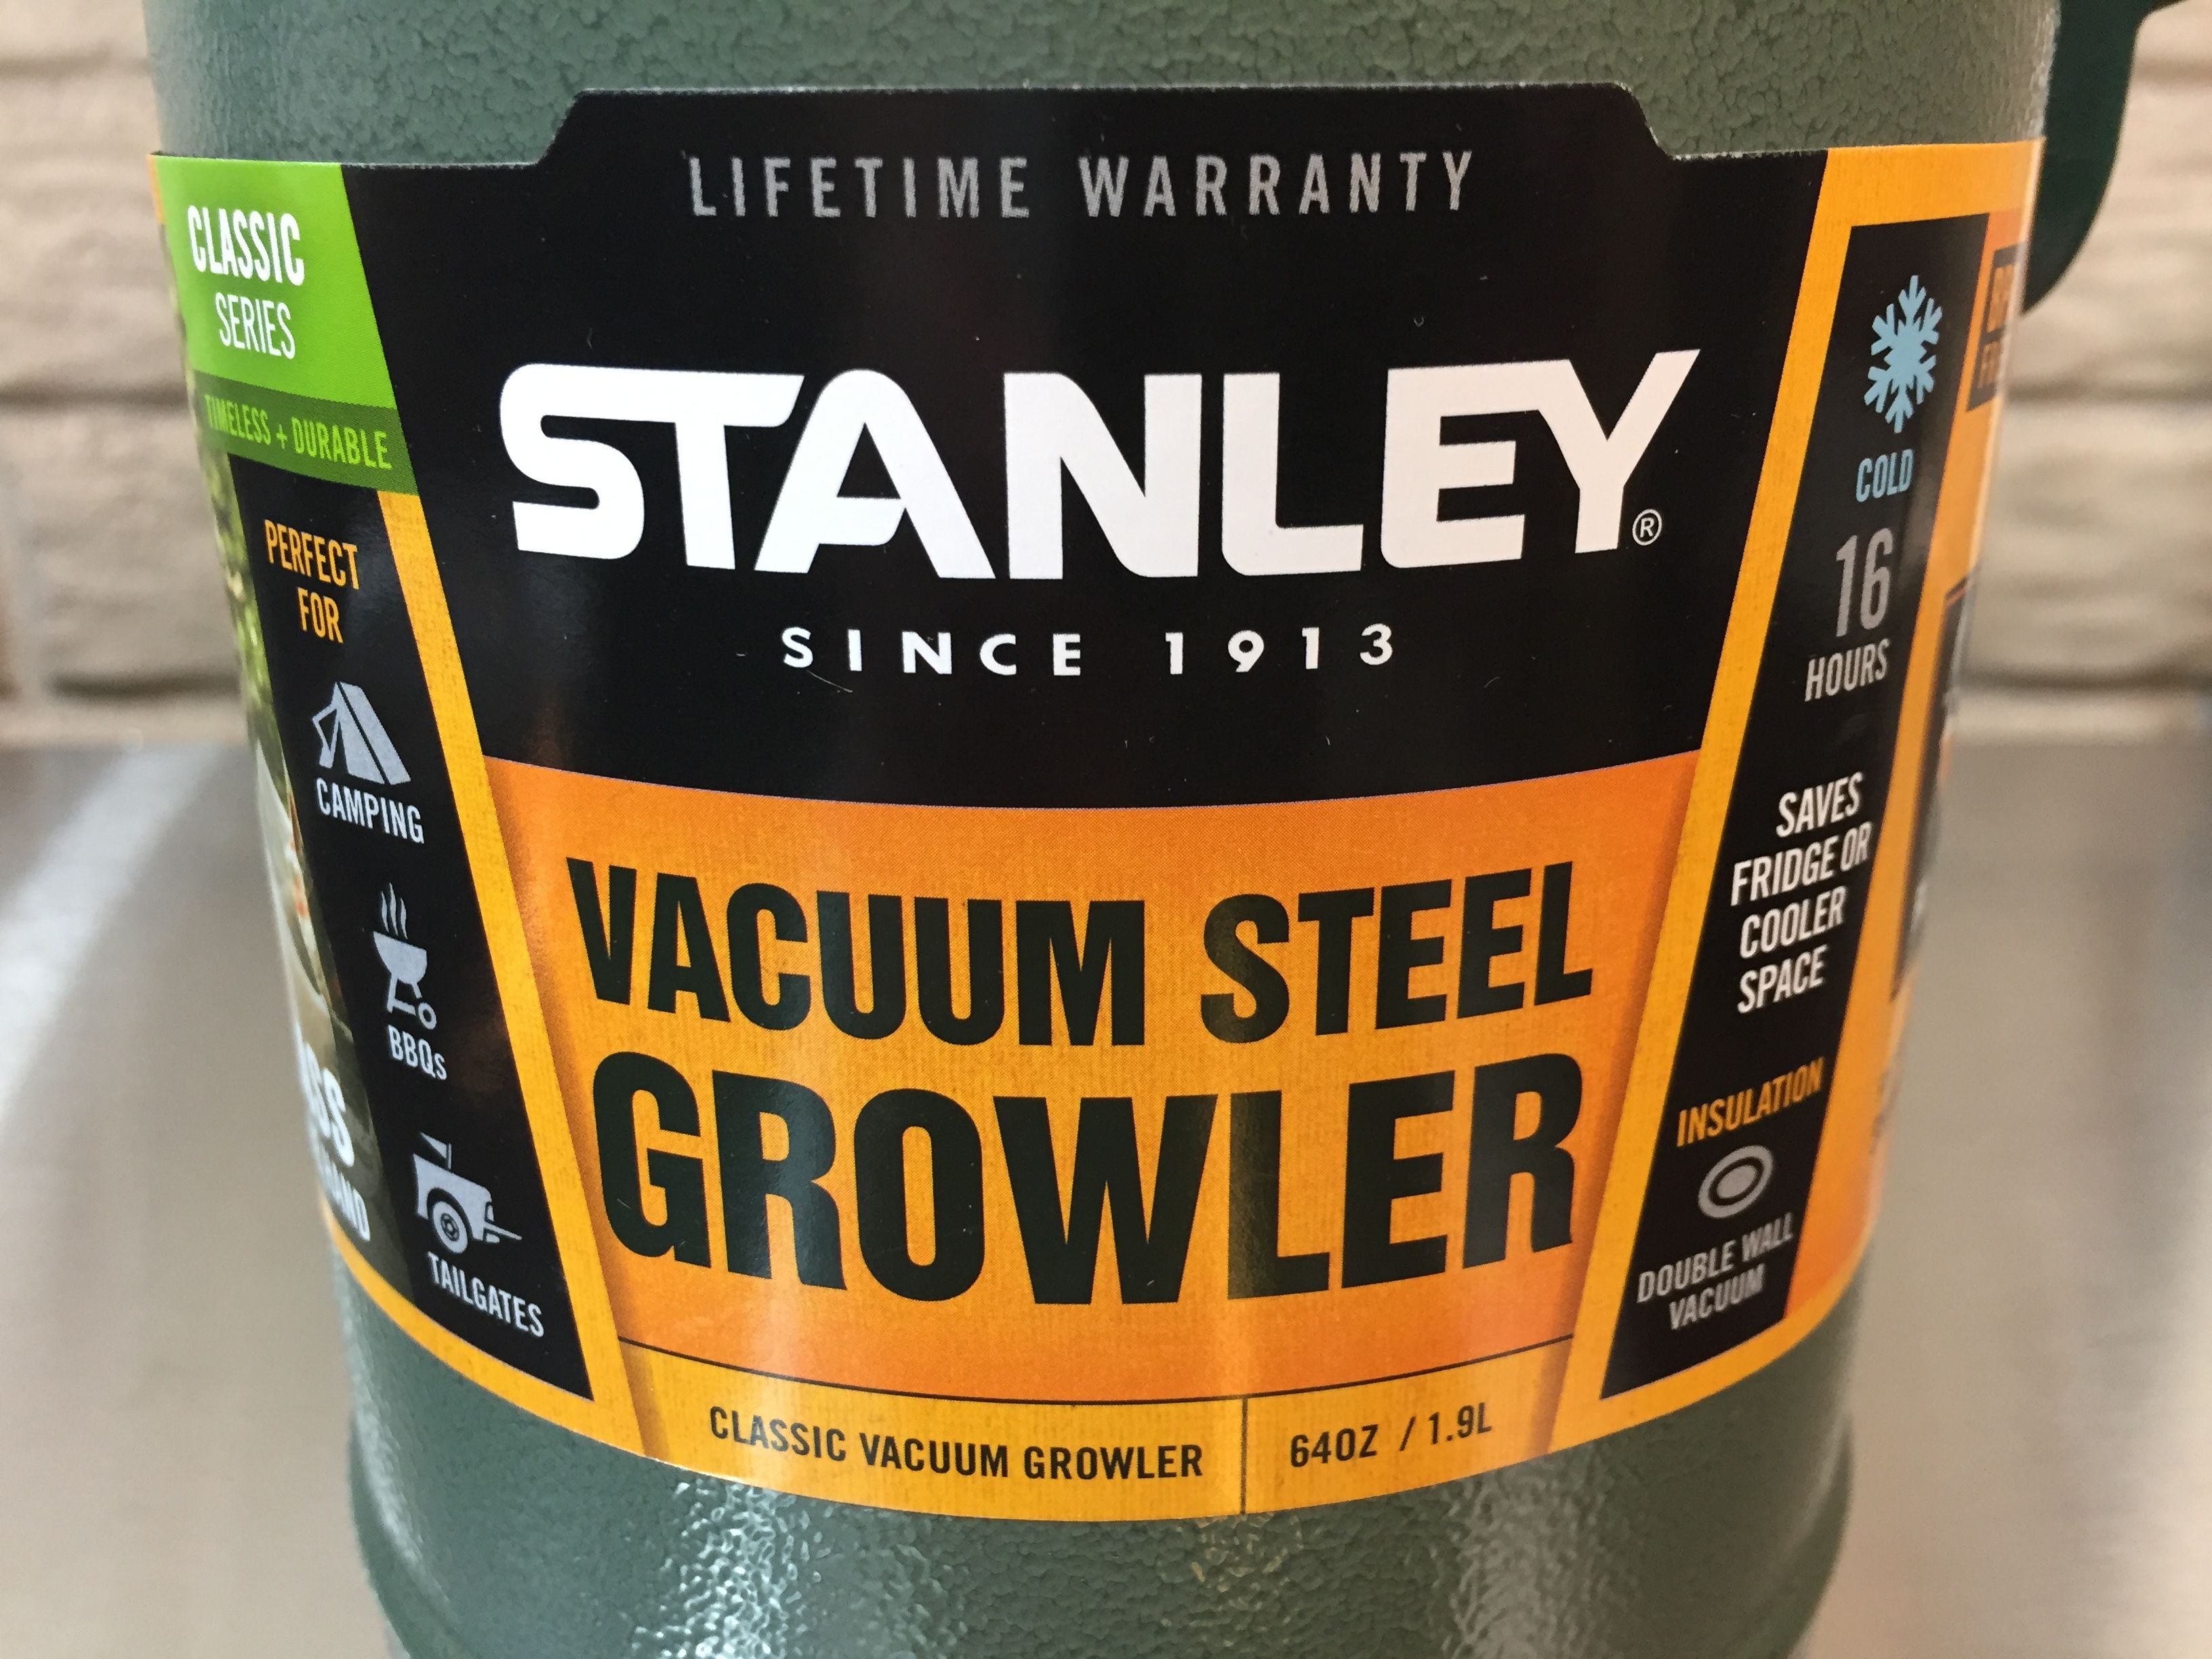 Stanley The Easy Pour Growler 64oz Stainless Steel 64 oz 10-01941